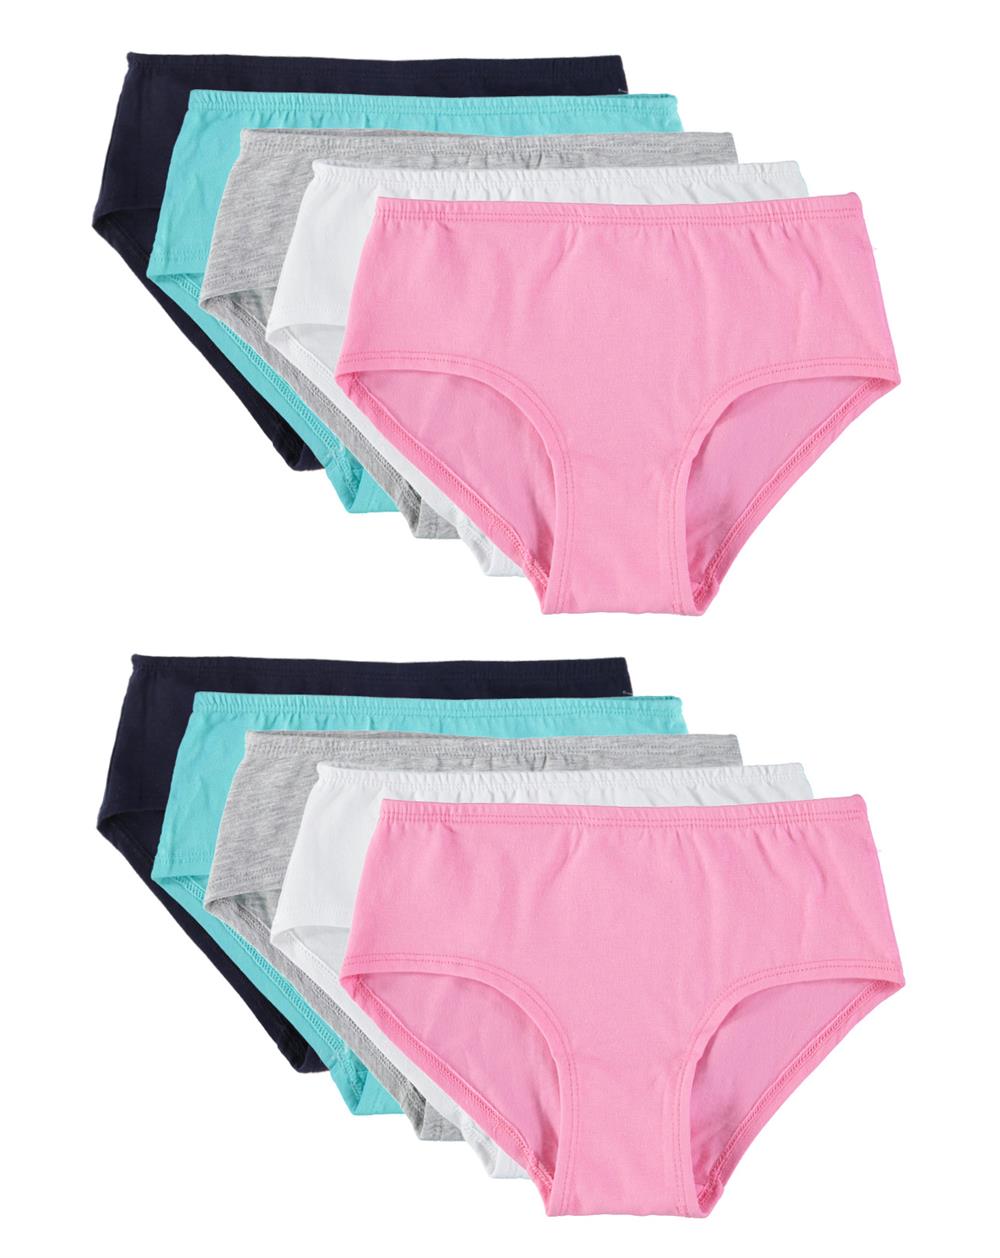 Fruit Of The Loom Girls Cotton Hipster Underwear 10 Pack, 10, Assorted